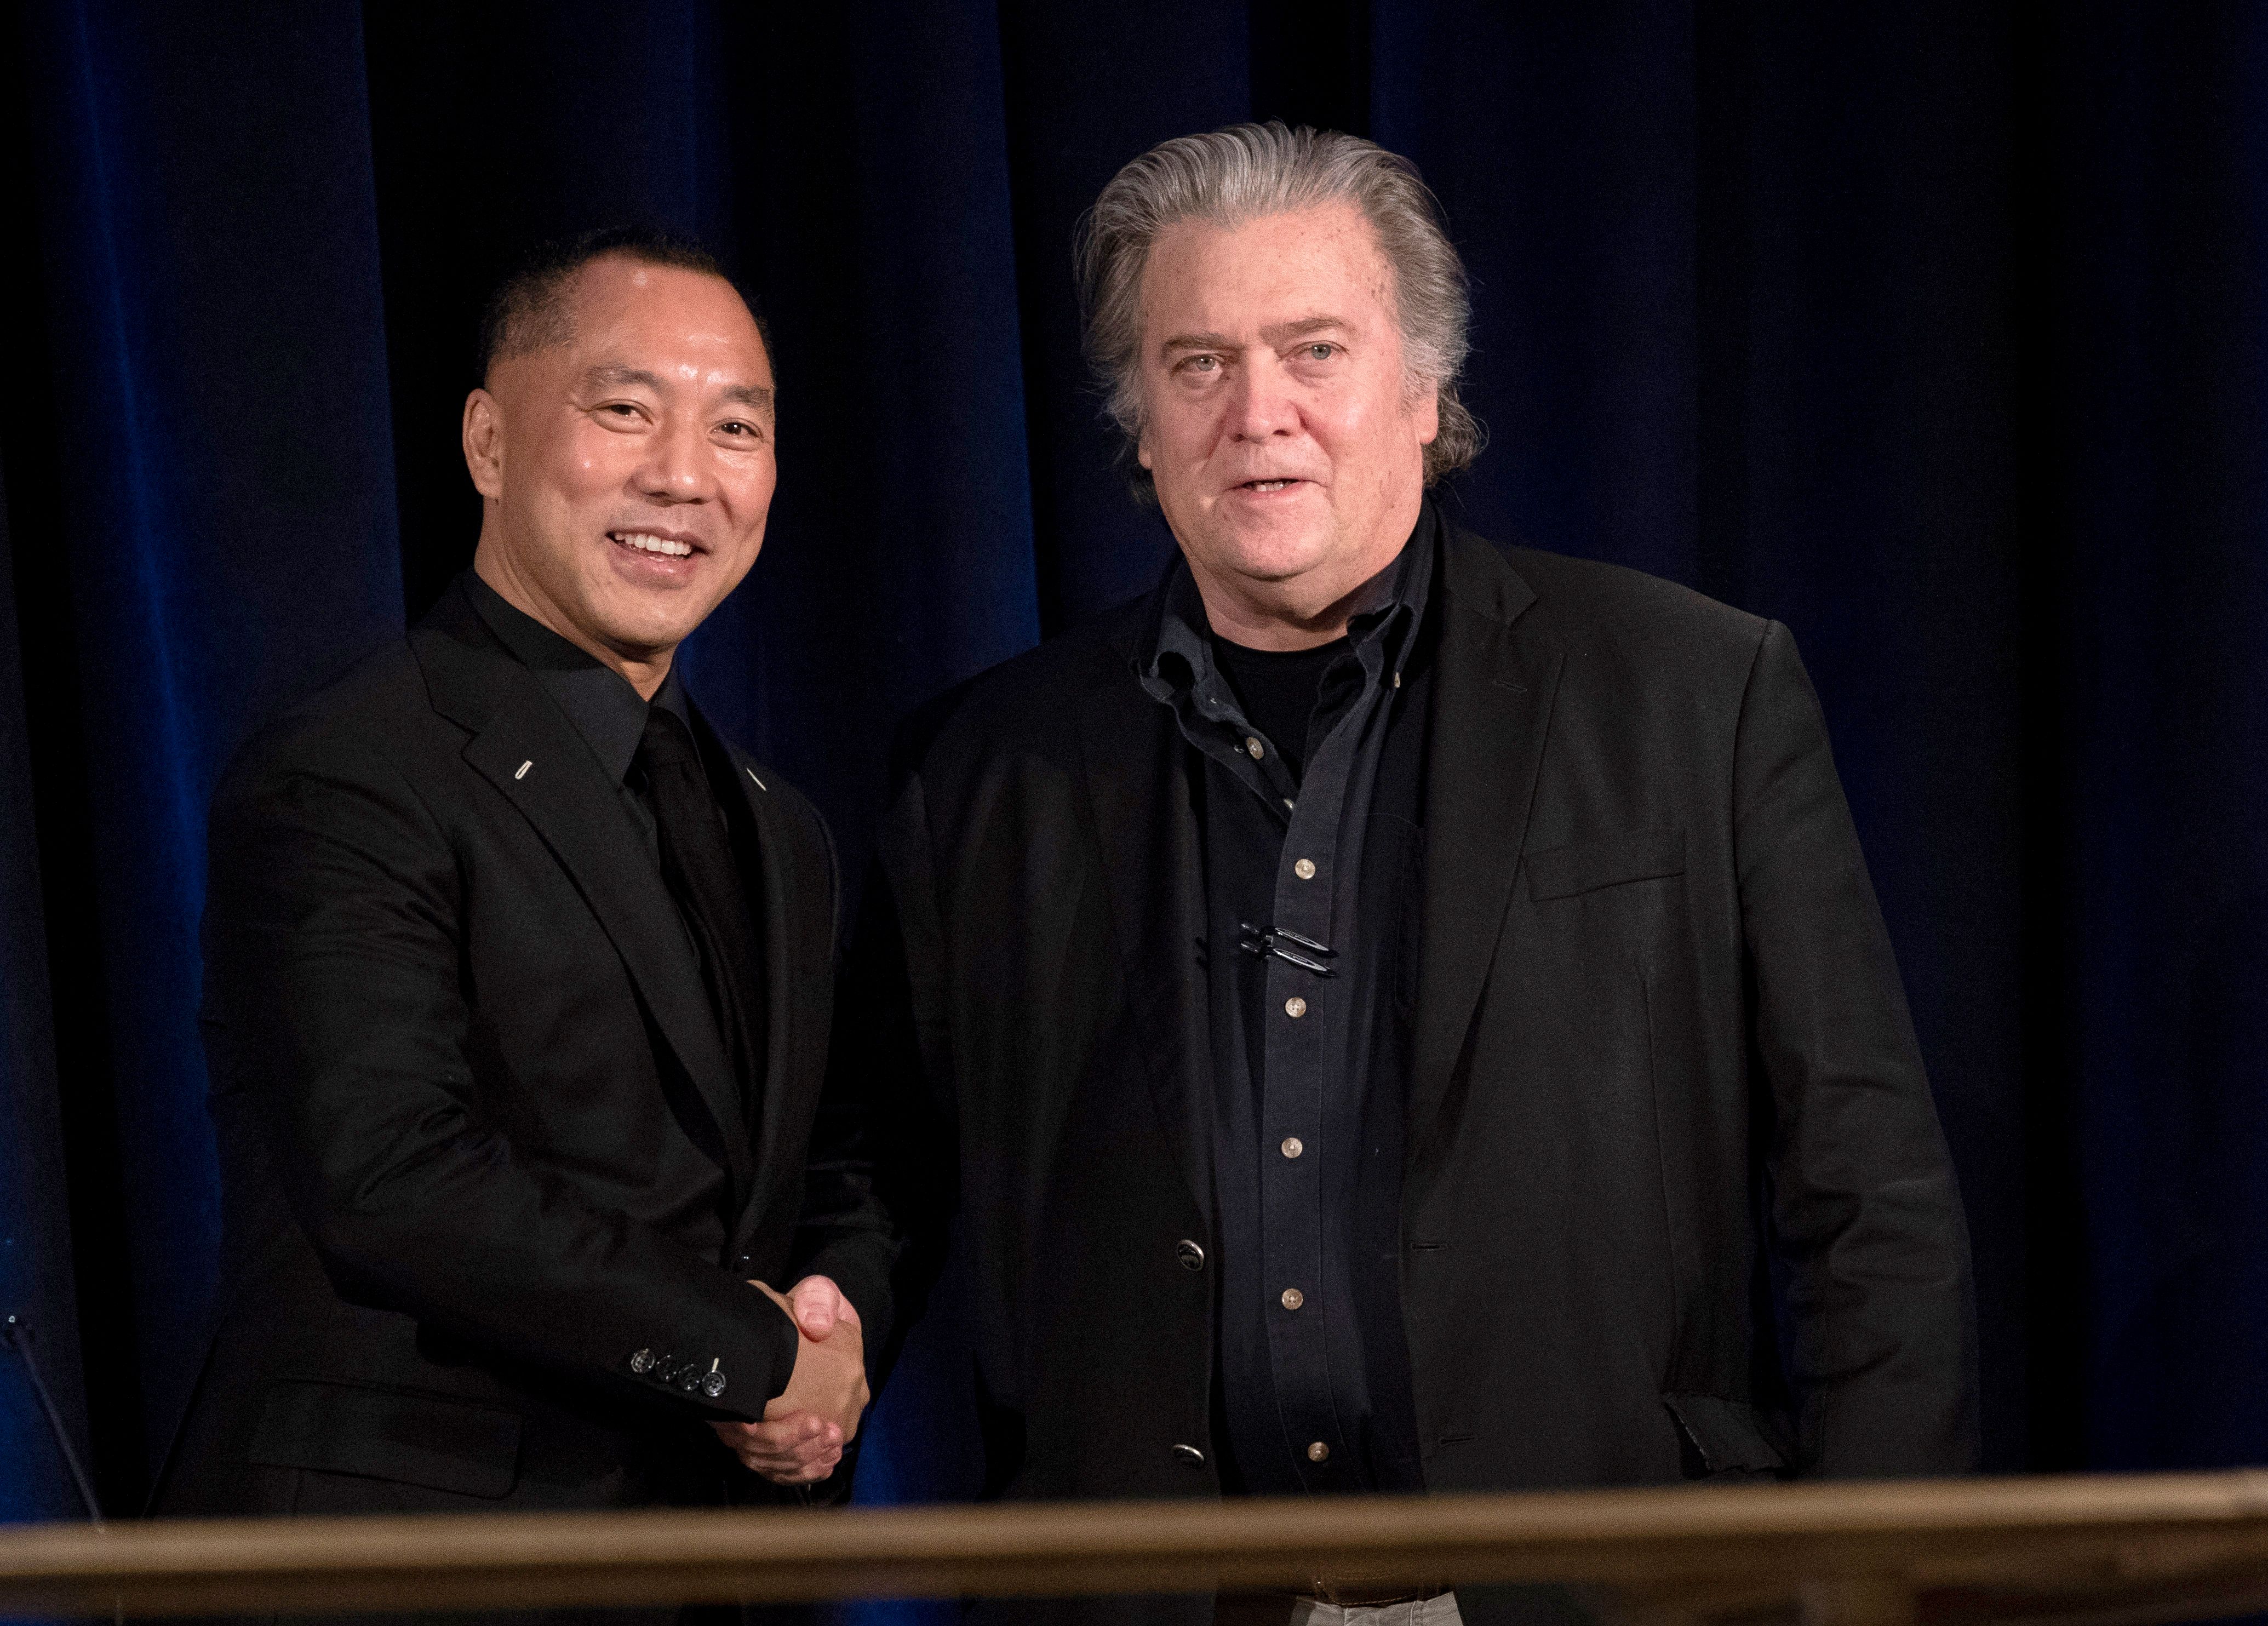 Steve Bannon and Guo Wengui shake hands in front of a black background, at the start of a news conference.